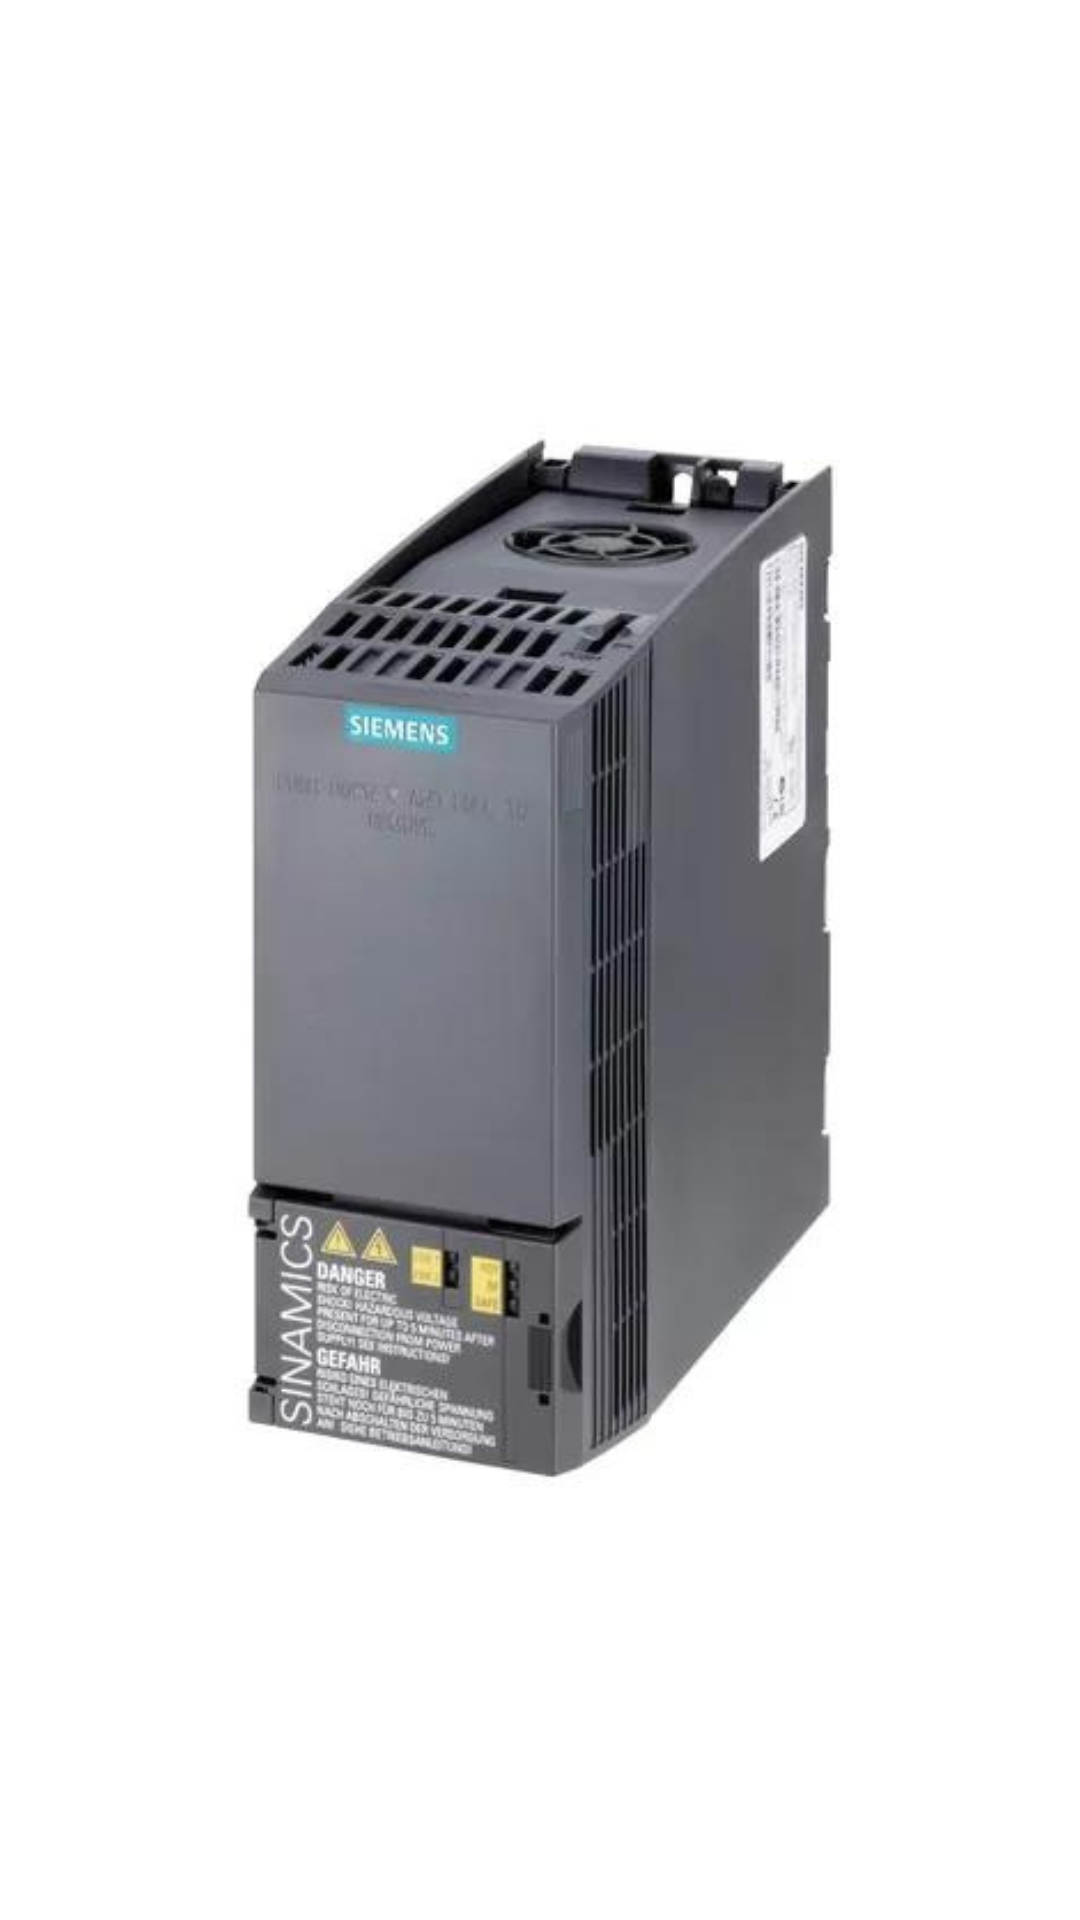 6SL3210-1KE11-8UF2 Siemens SINAMICS G120C RATED POWER 0,55KW WITH 150% OVERLOAD FOR 3 SEC 3AC380-480V +10/-20% 47-63HZ UNFILTERED I/O-INTERFACE: 6DI, 2DO,1AI,1AO SAFE TORQUE OFF INTEGRATED FIELDBUS: PROFINET-PN